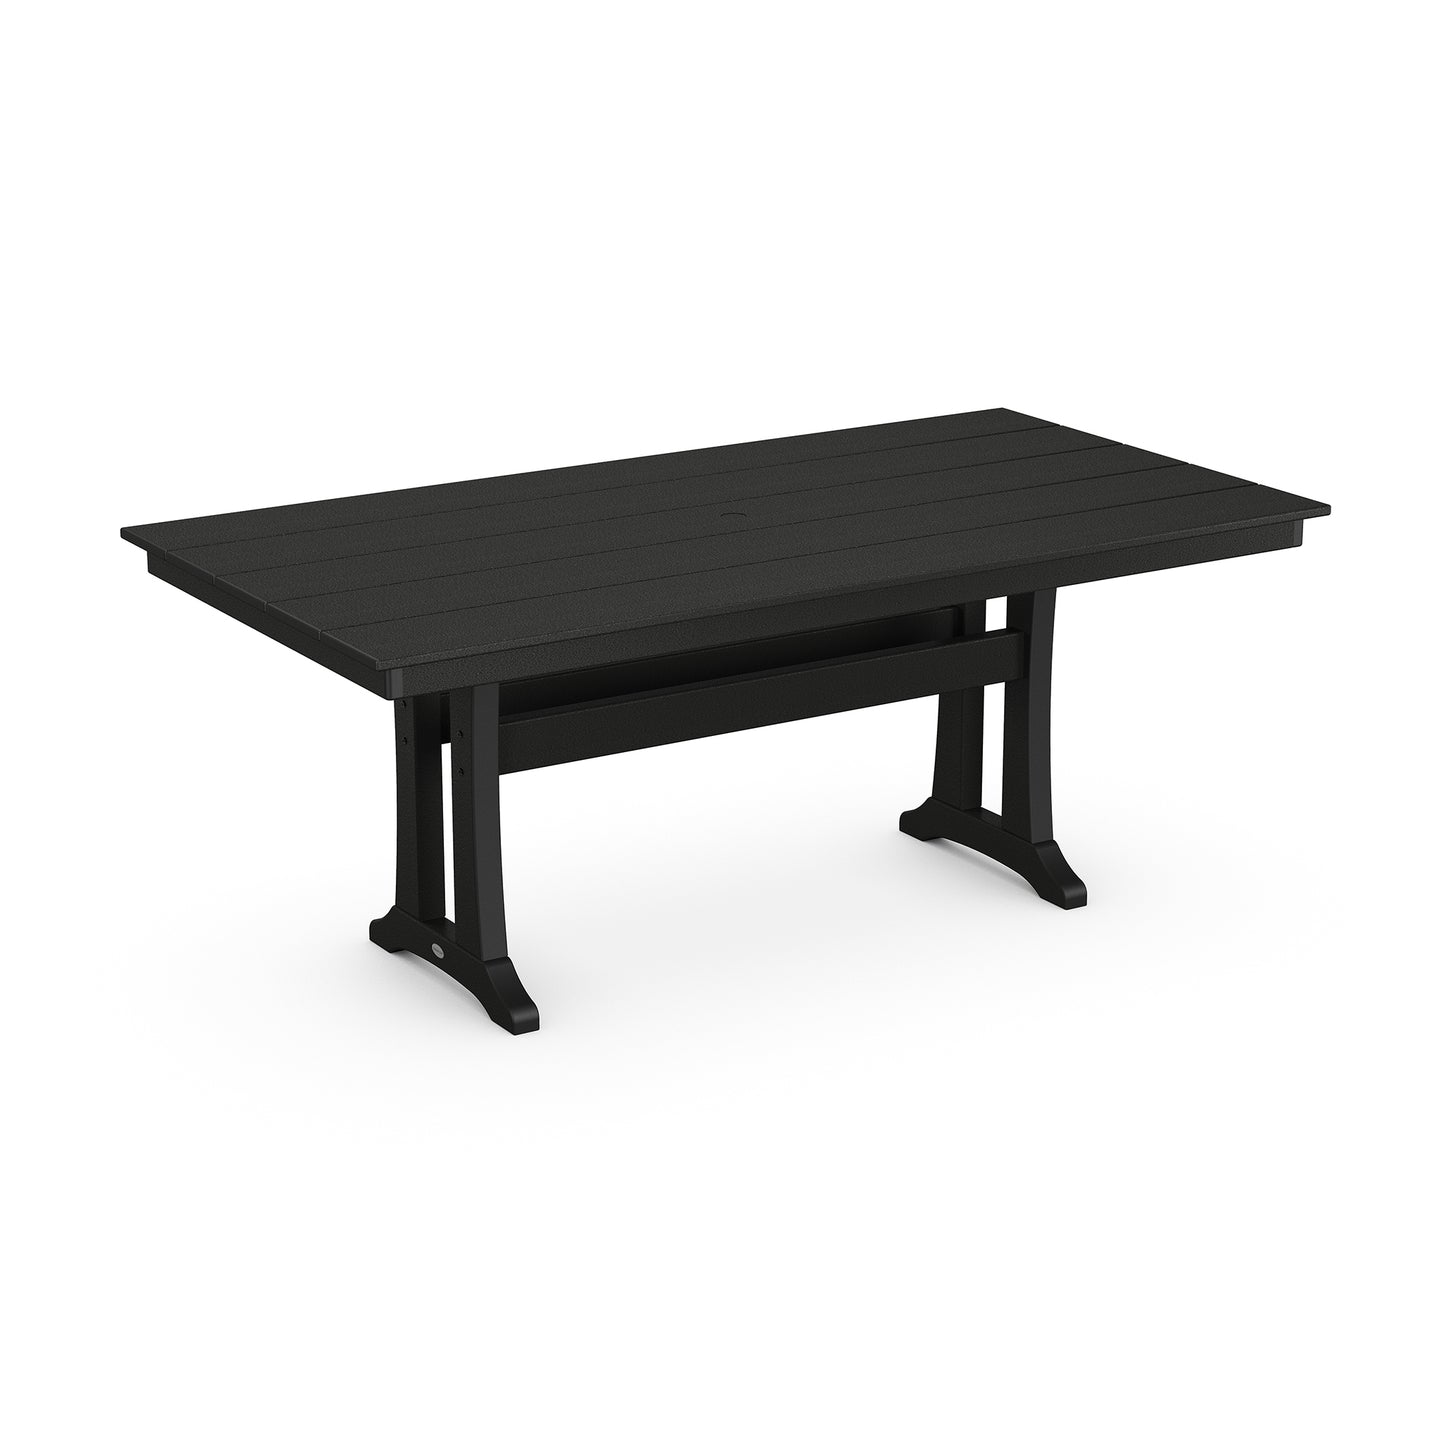 A 3D rendering of a modern, rectangular, black POLYWOOD® Farmhouse Trestle 37" x 72" dining table with a textured top and stylized metal legs, shown against a white background.